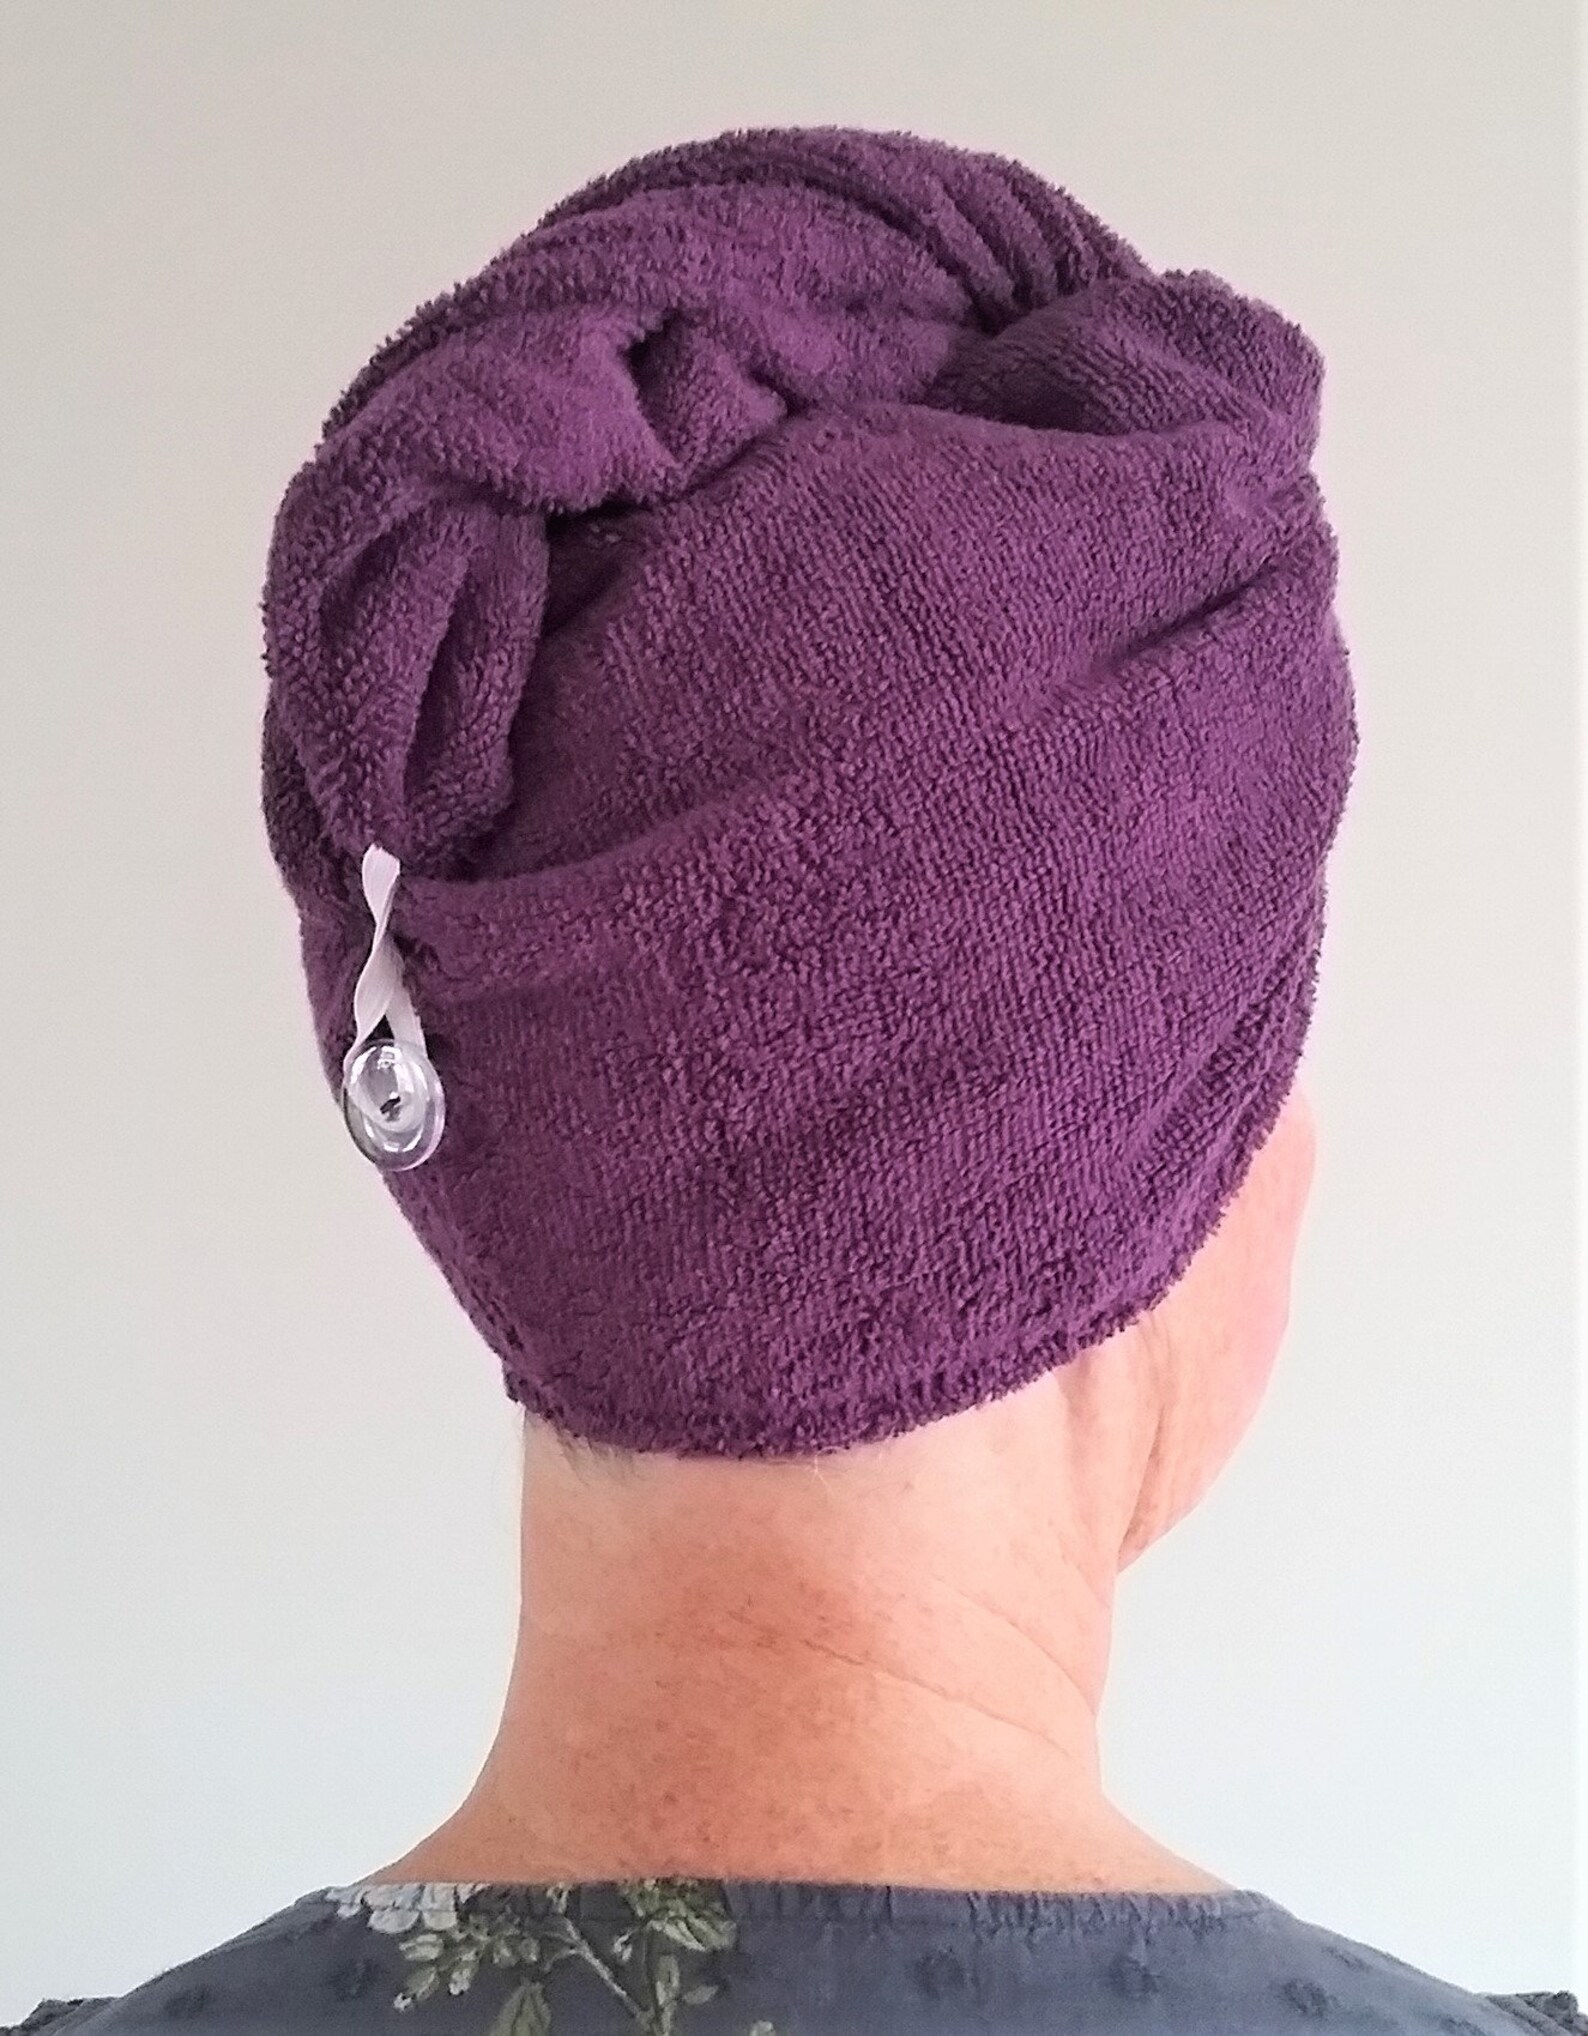 Hair Turban Towel In Purple 100 Cotton Absorbent Soft Wrap Etsy